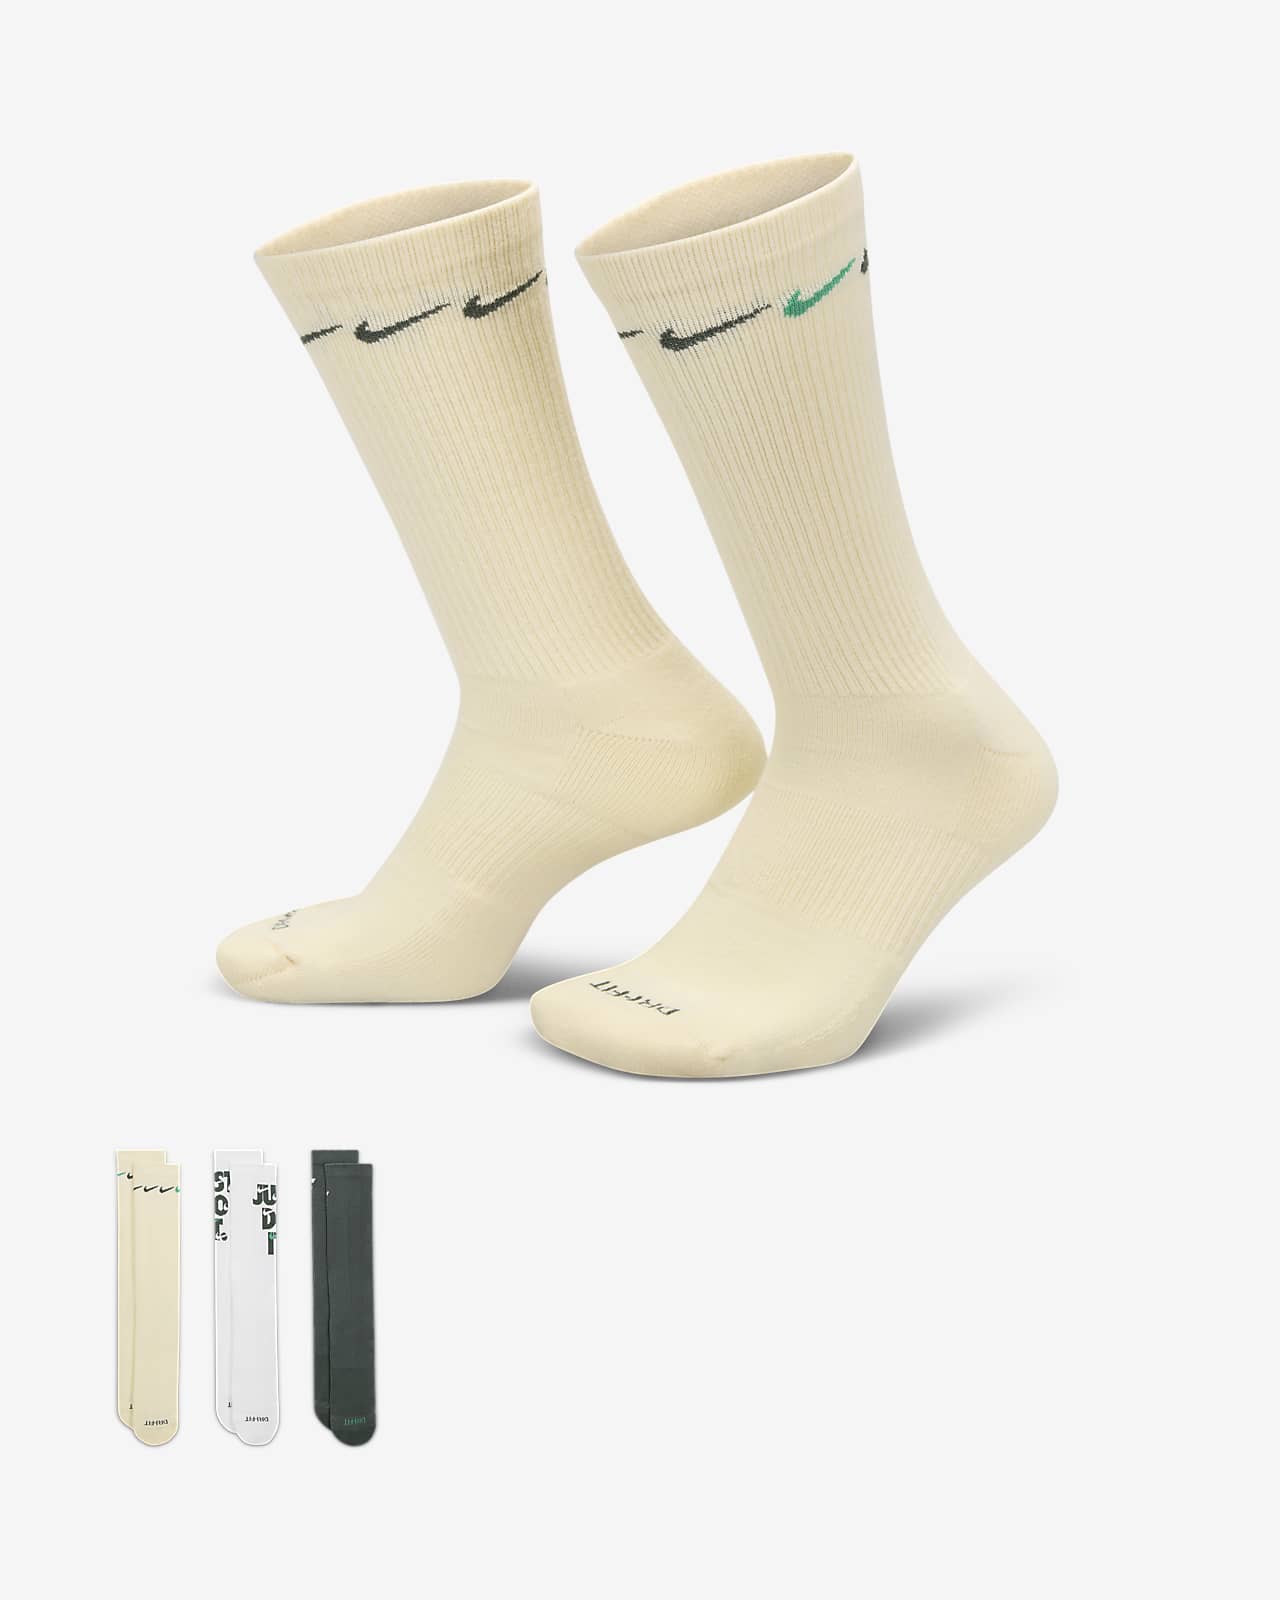 Chaussettes mi-mollet Nike Sportswear Everyday Essential (3 paires). Nike FR